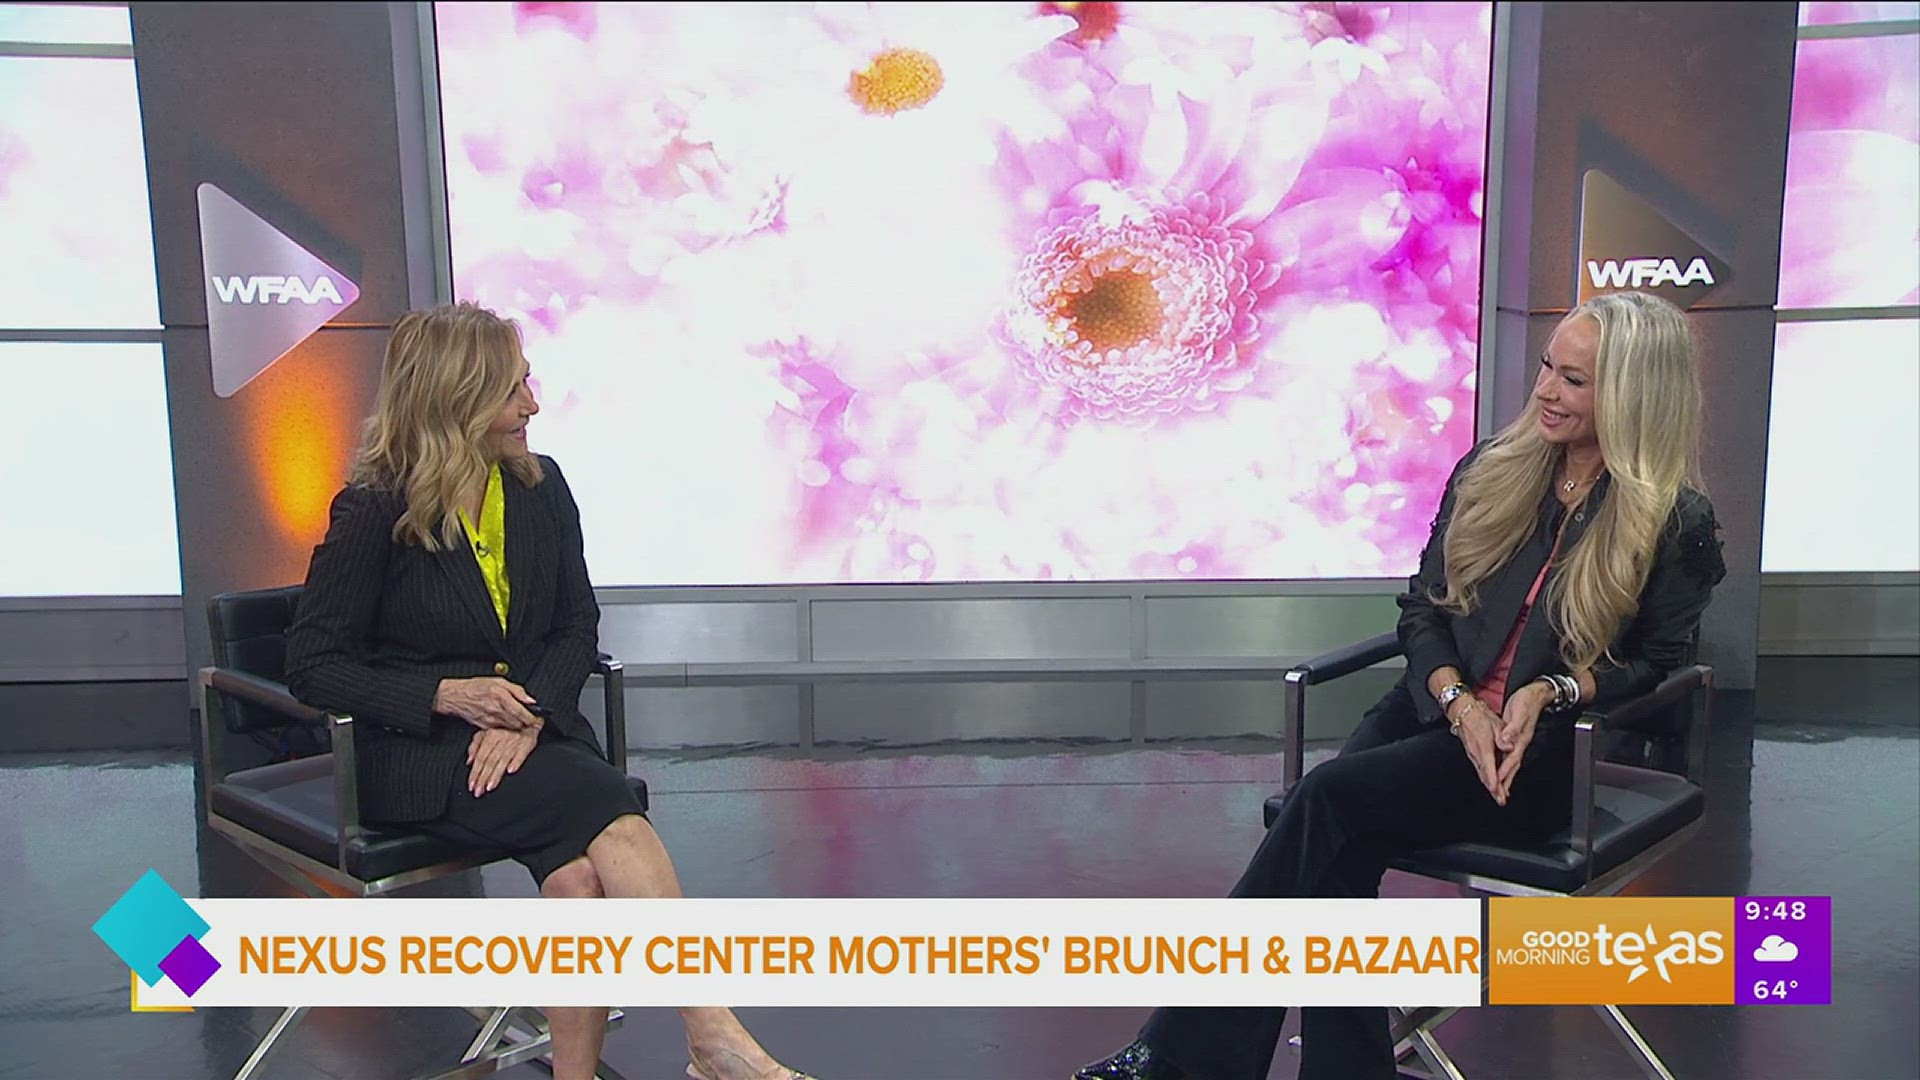 Recording artist and musician Rachel Stacy shares her sobriety journey, her work with Nexus Recovery Center and previews their upcoming Mothers' Brunch & Bazaar